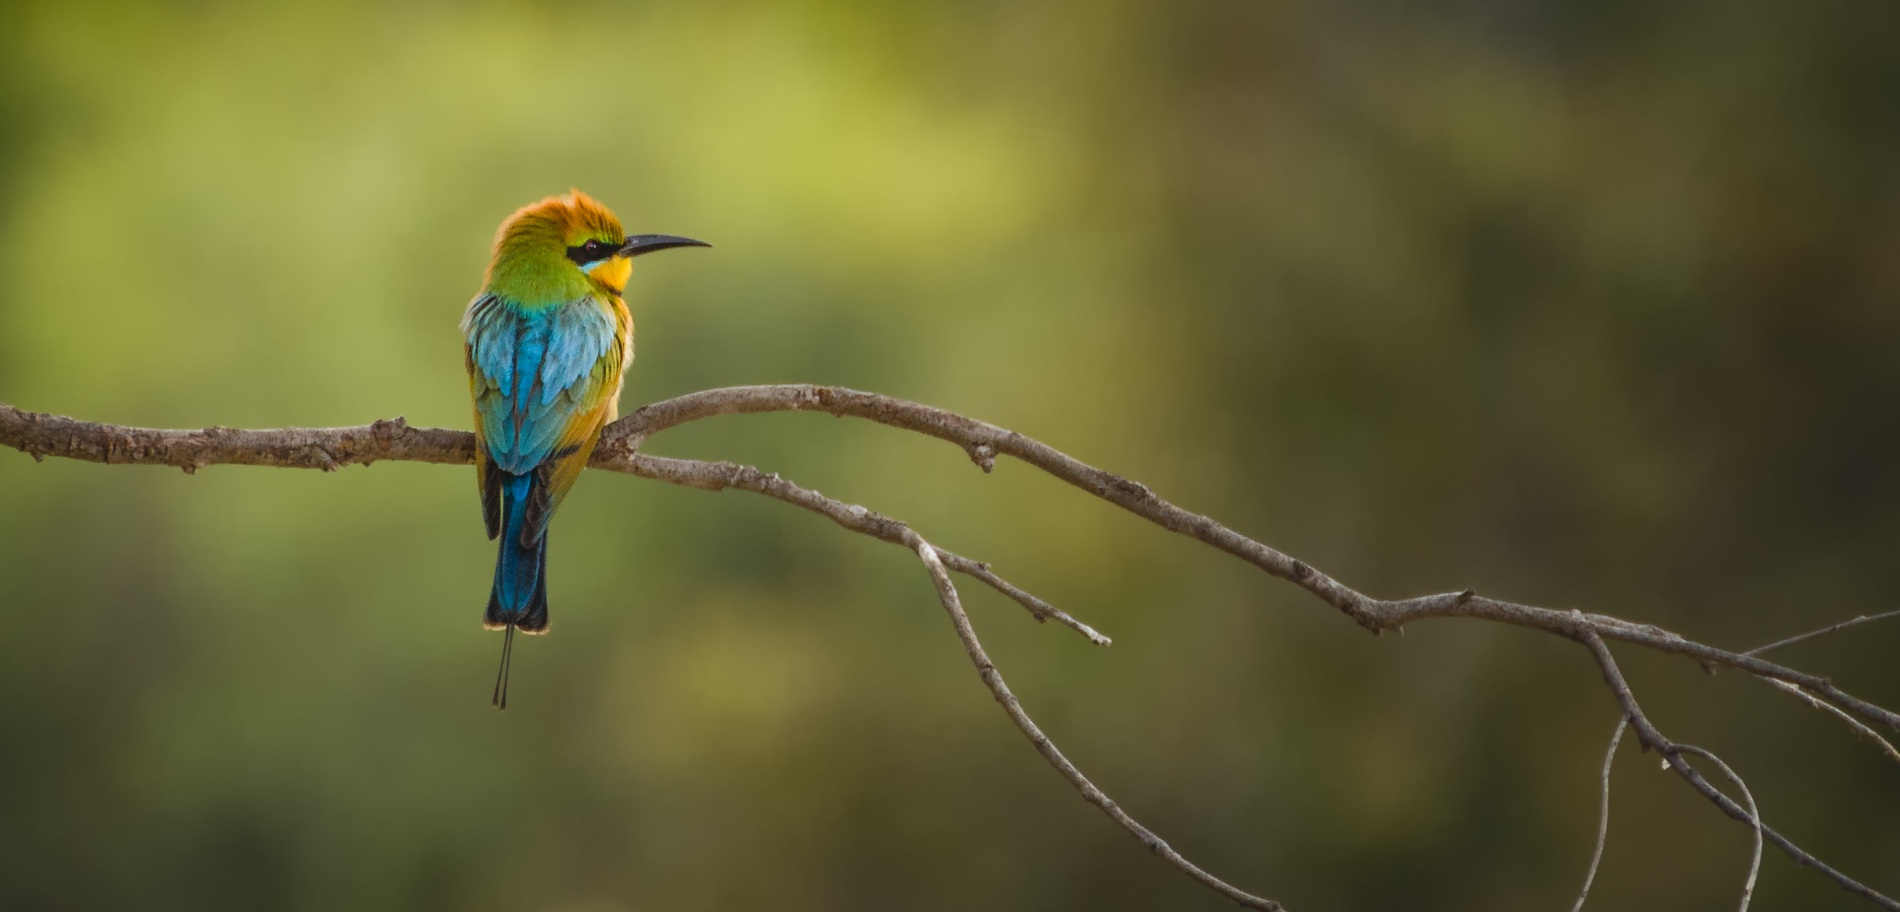 Birdlife in the Perth Hills - Rainbow Bee Eater | Photo by Nature by Nathan